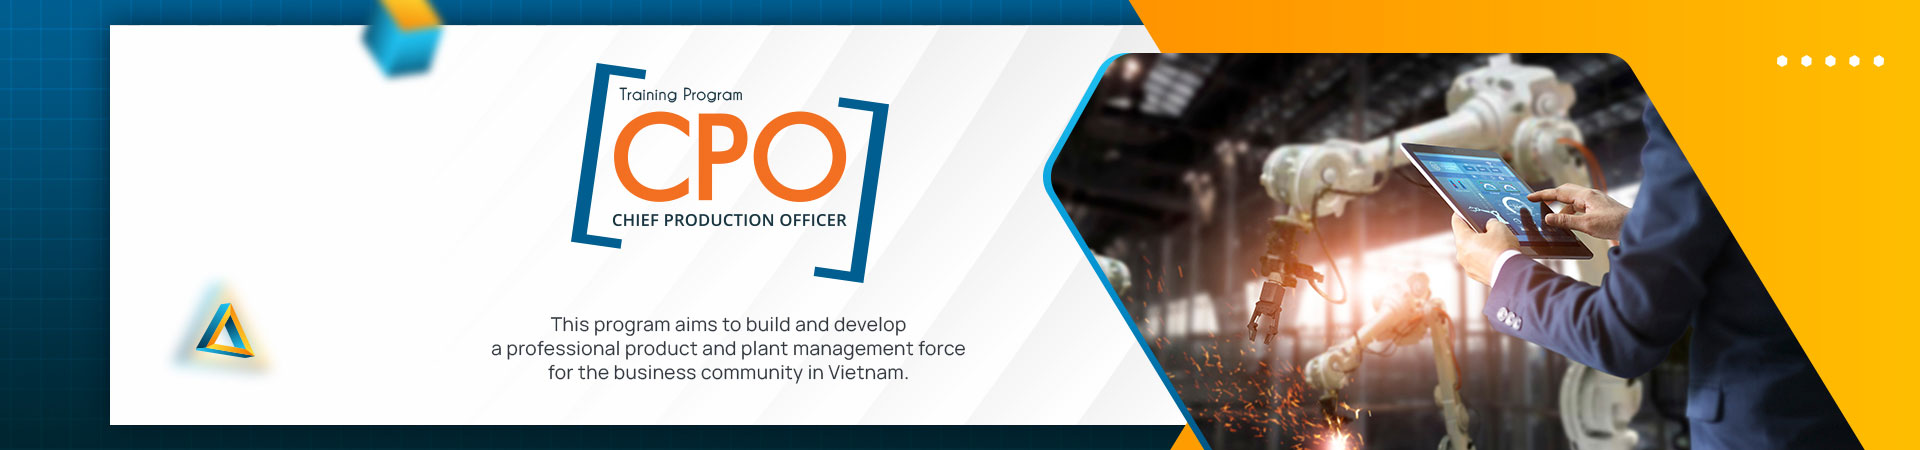 CPO - Chief Production Officer